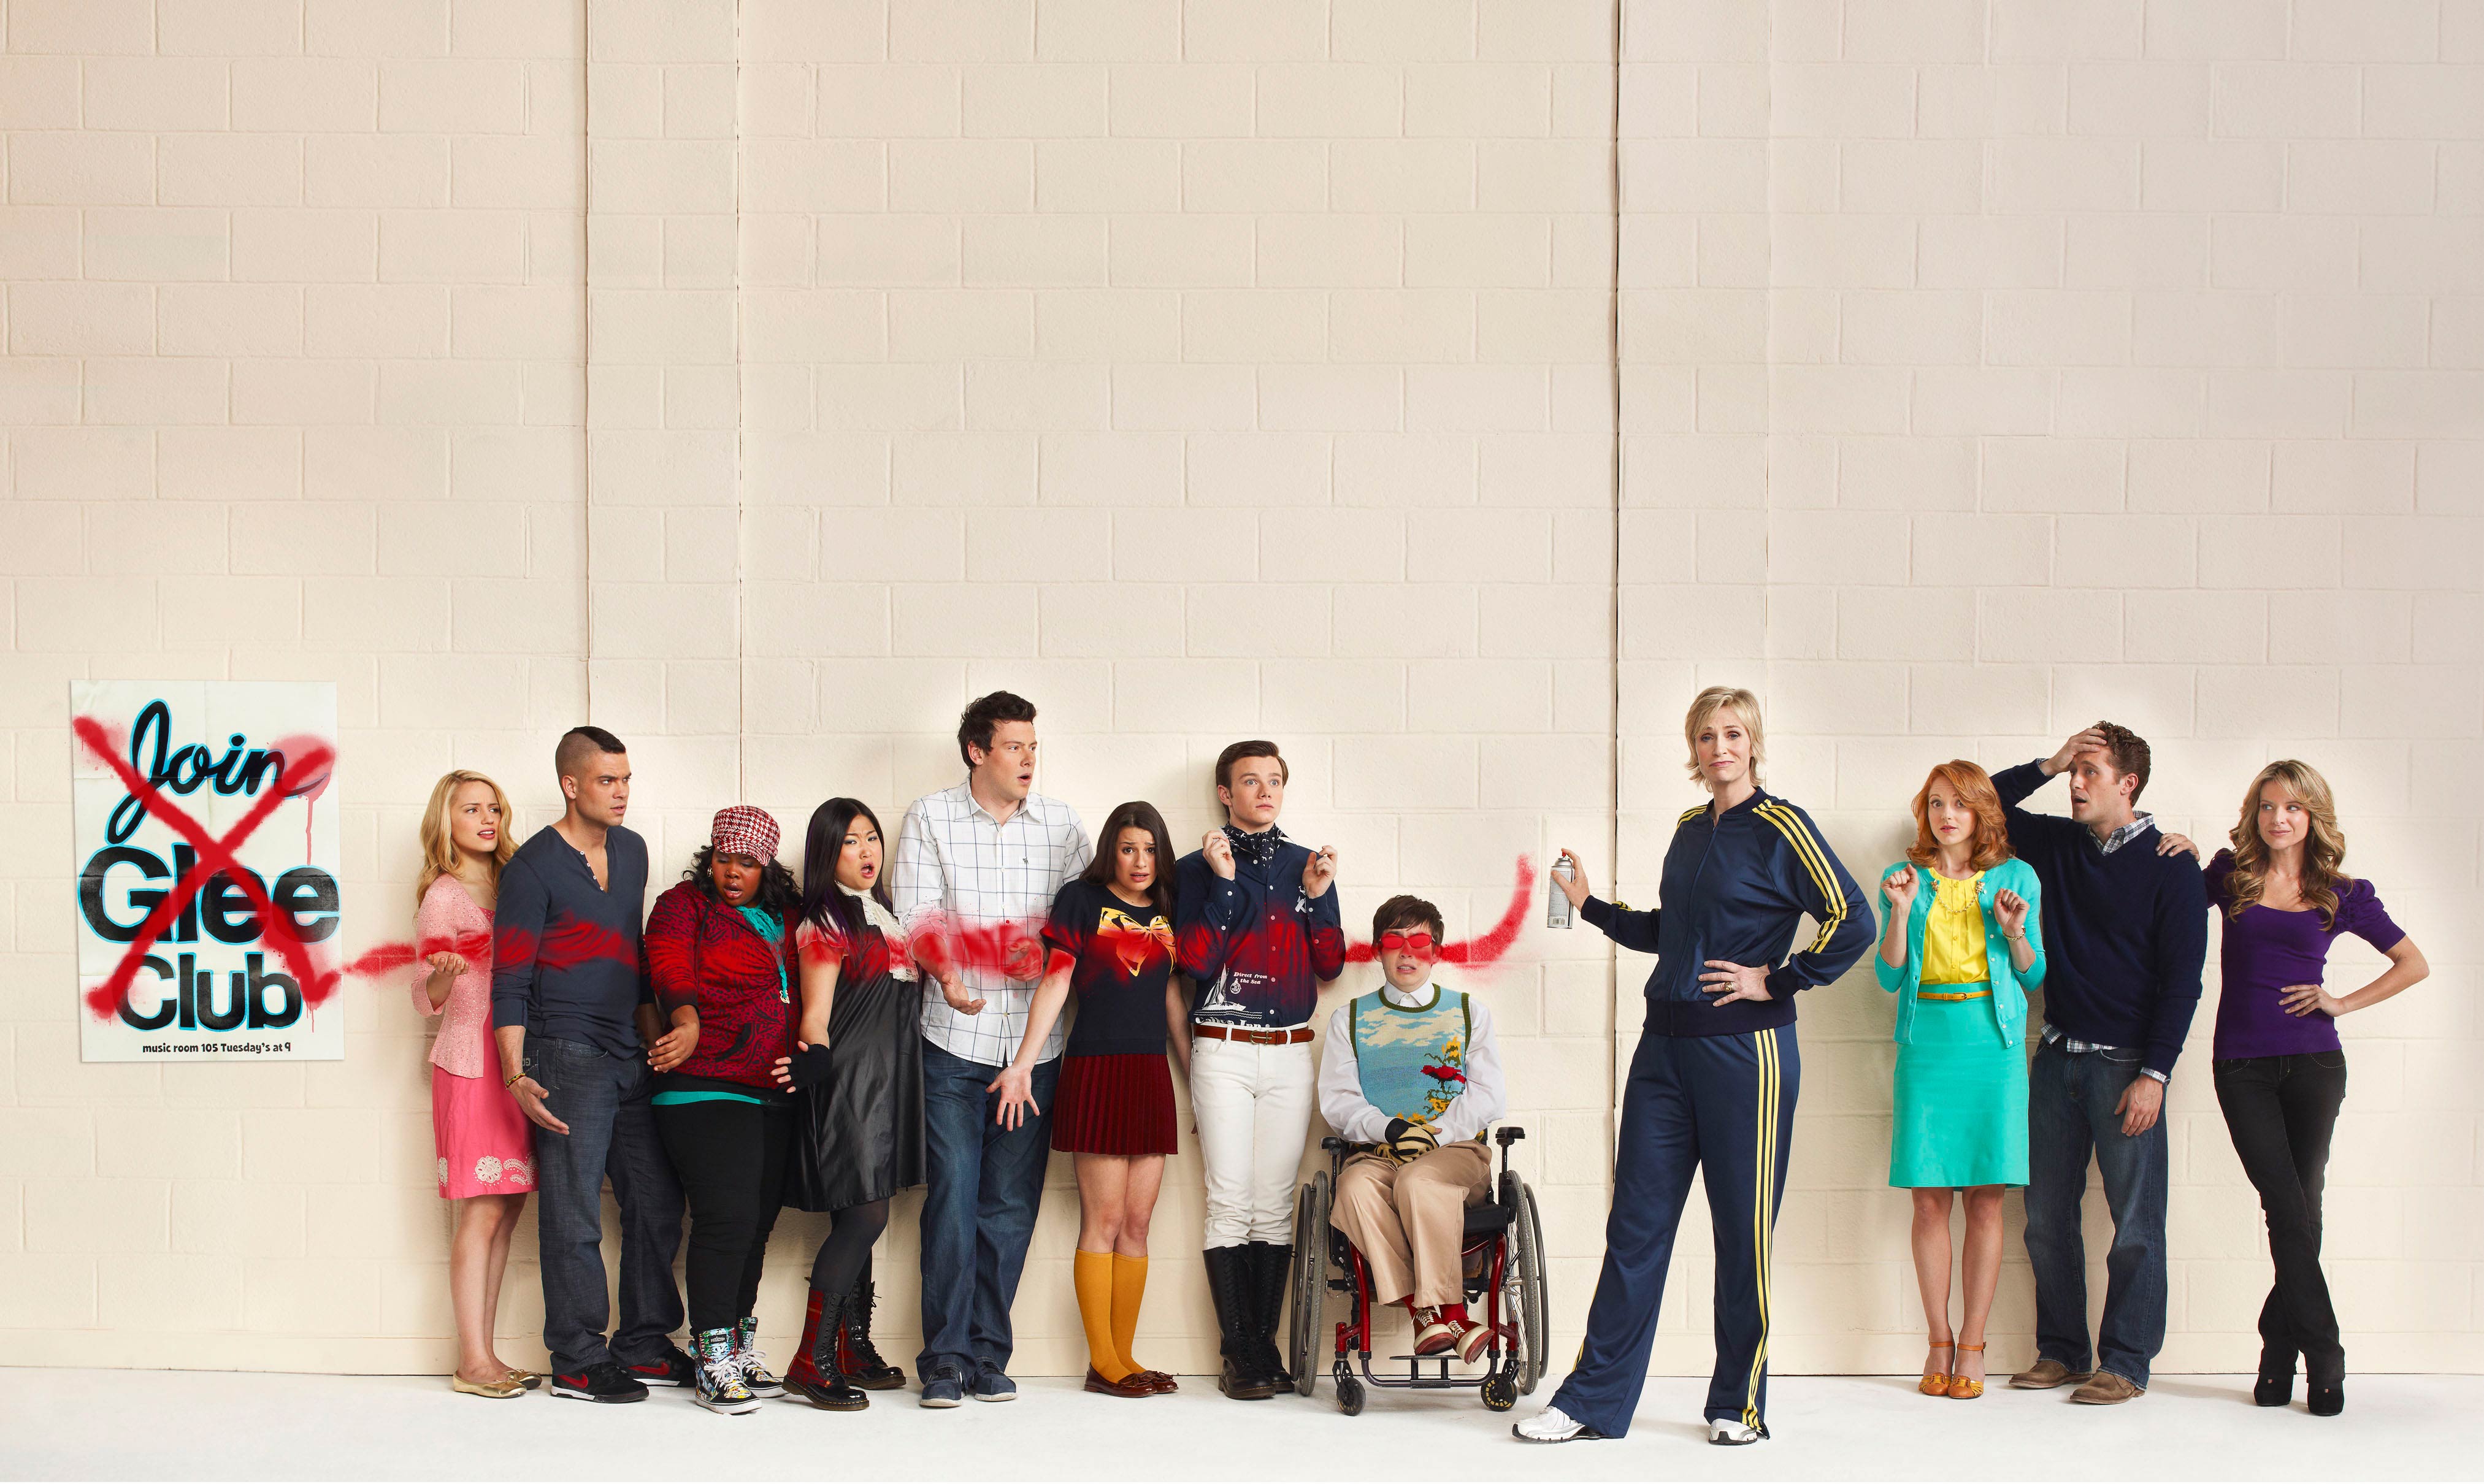 Free Download Glee Wallpaper 4050x24 For Your Desktop Mobile Tablet Explore 57 Glee Wallpaper Glee Wallpaper For Phone Glee Wallpaper For Ipad Glee Cast Wallpaper